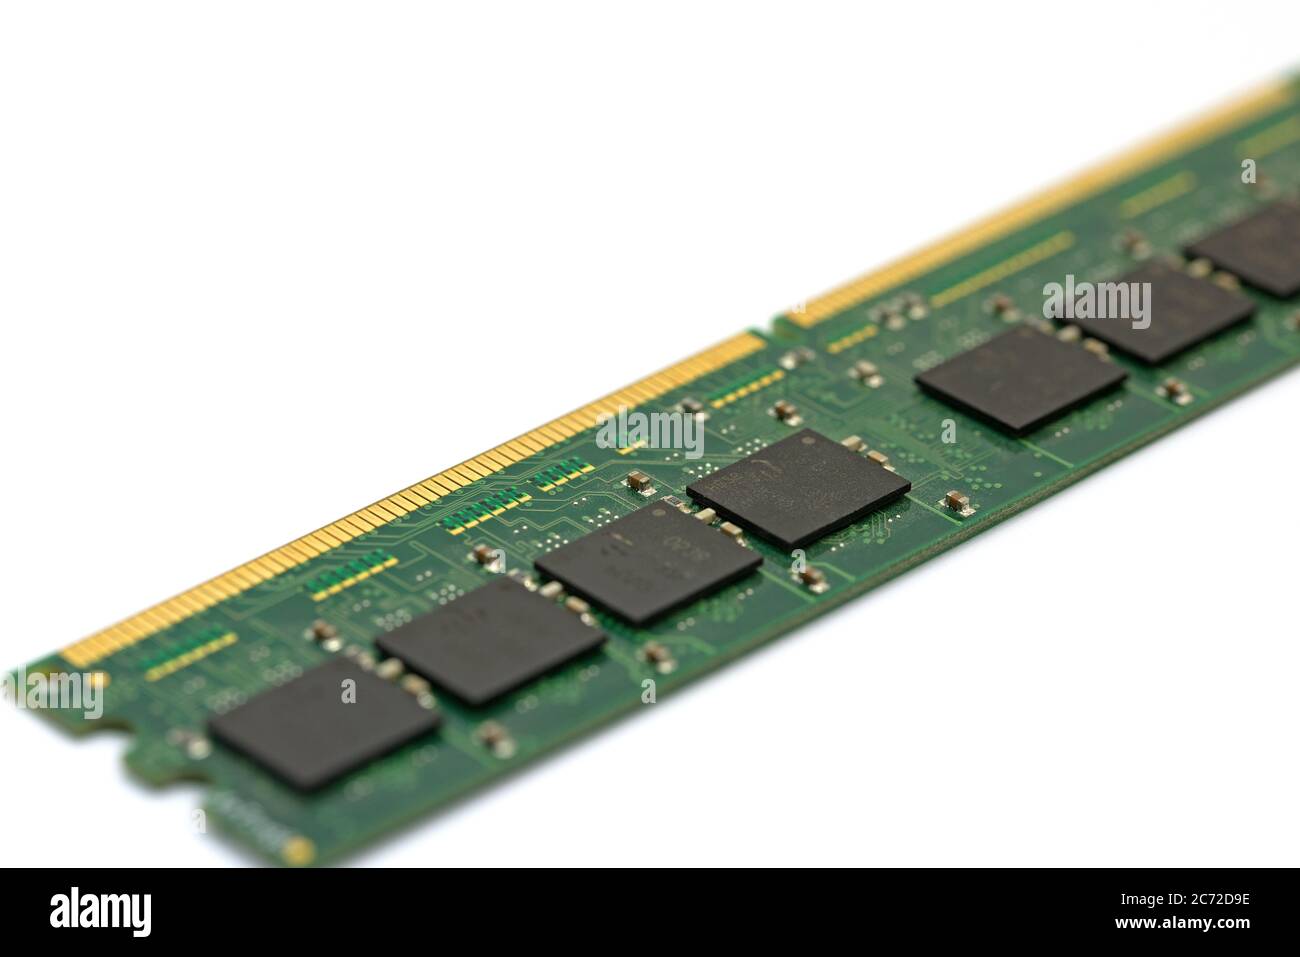 Ram memory in a close-up Stock Photo